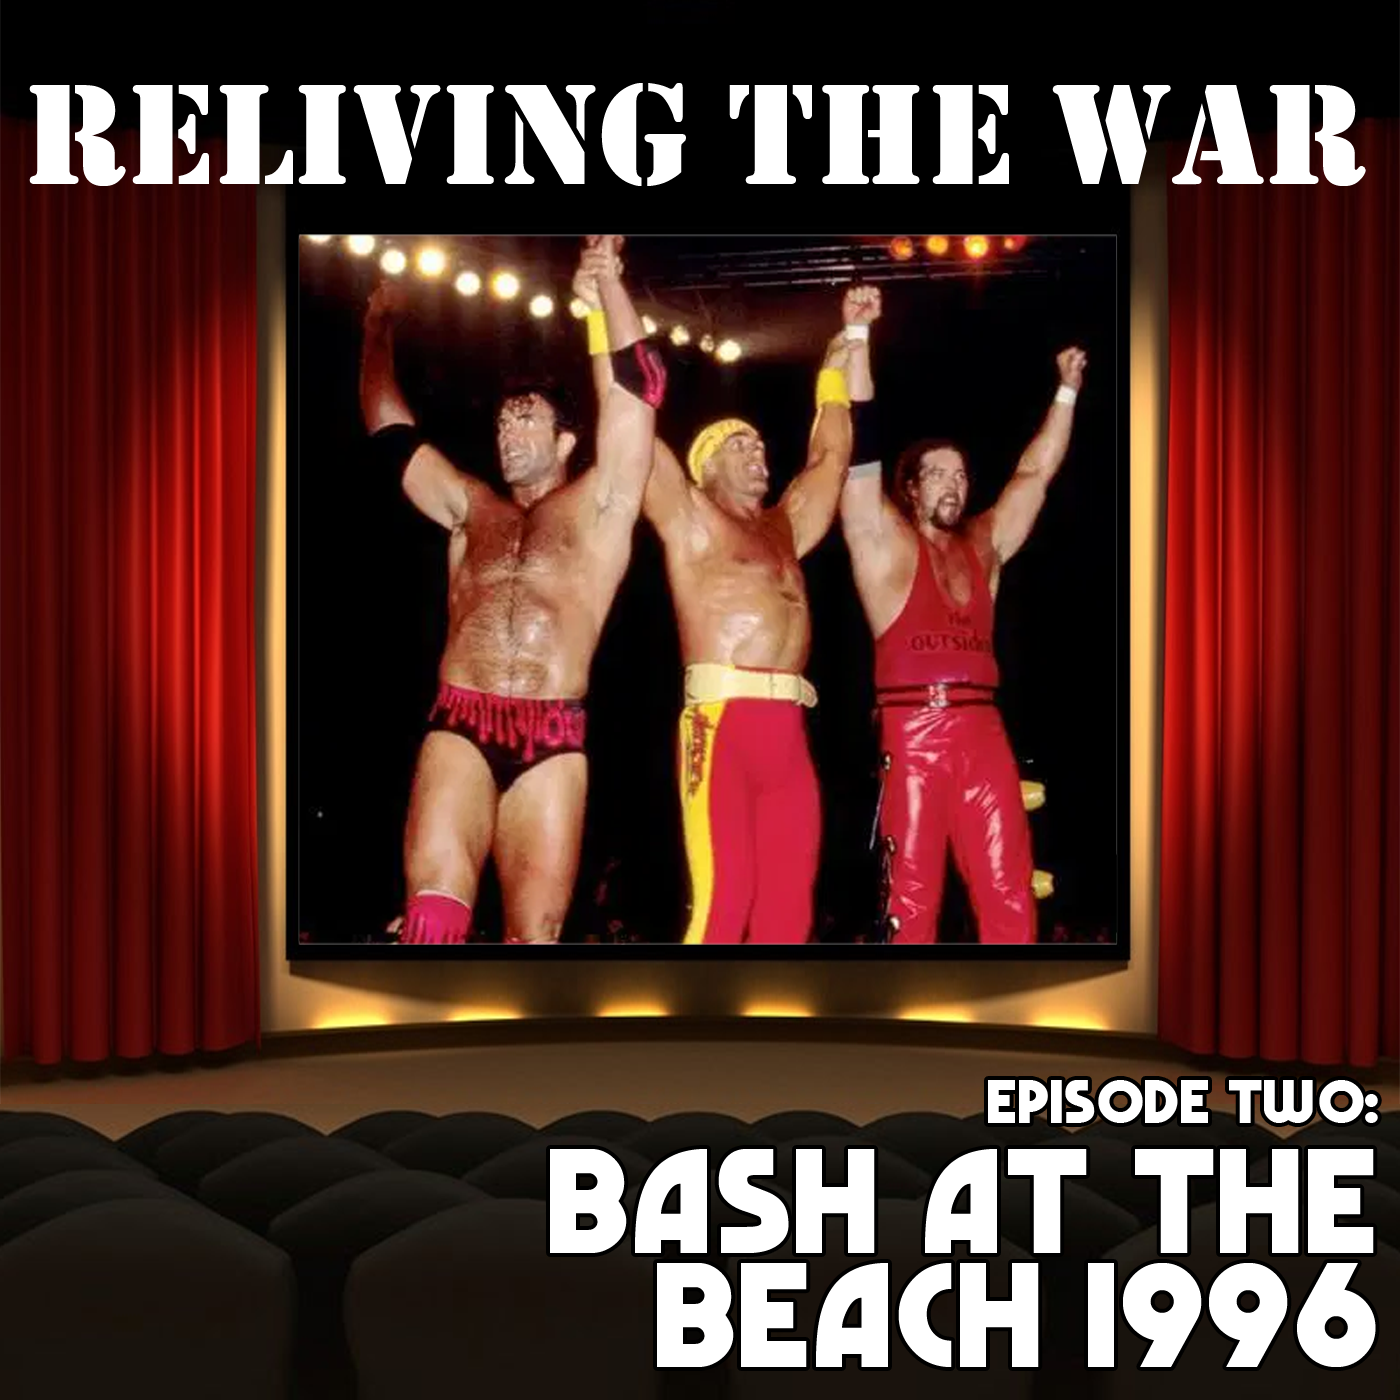 Reliving The War - Episode 2: Bash At The Beach '96